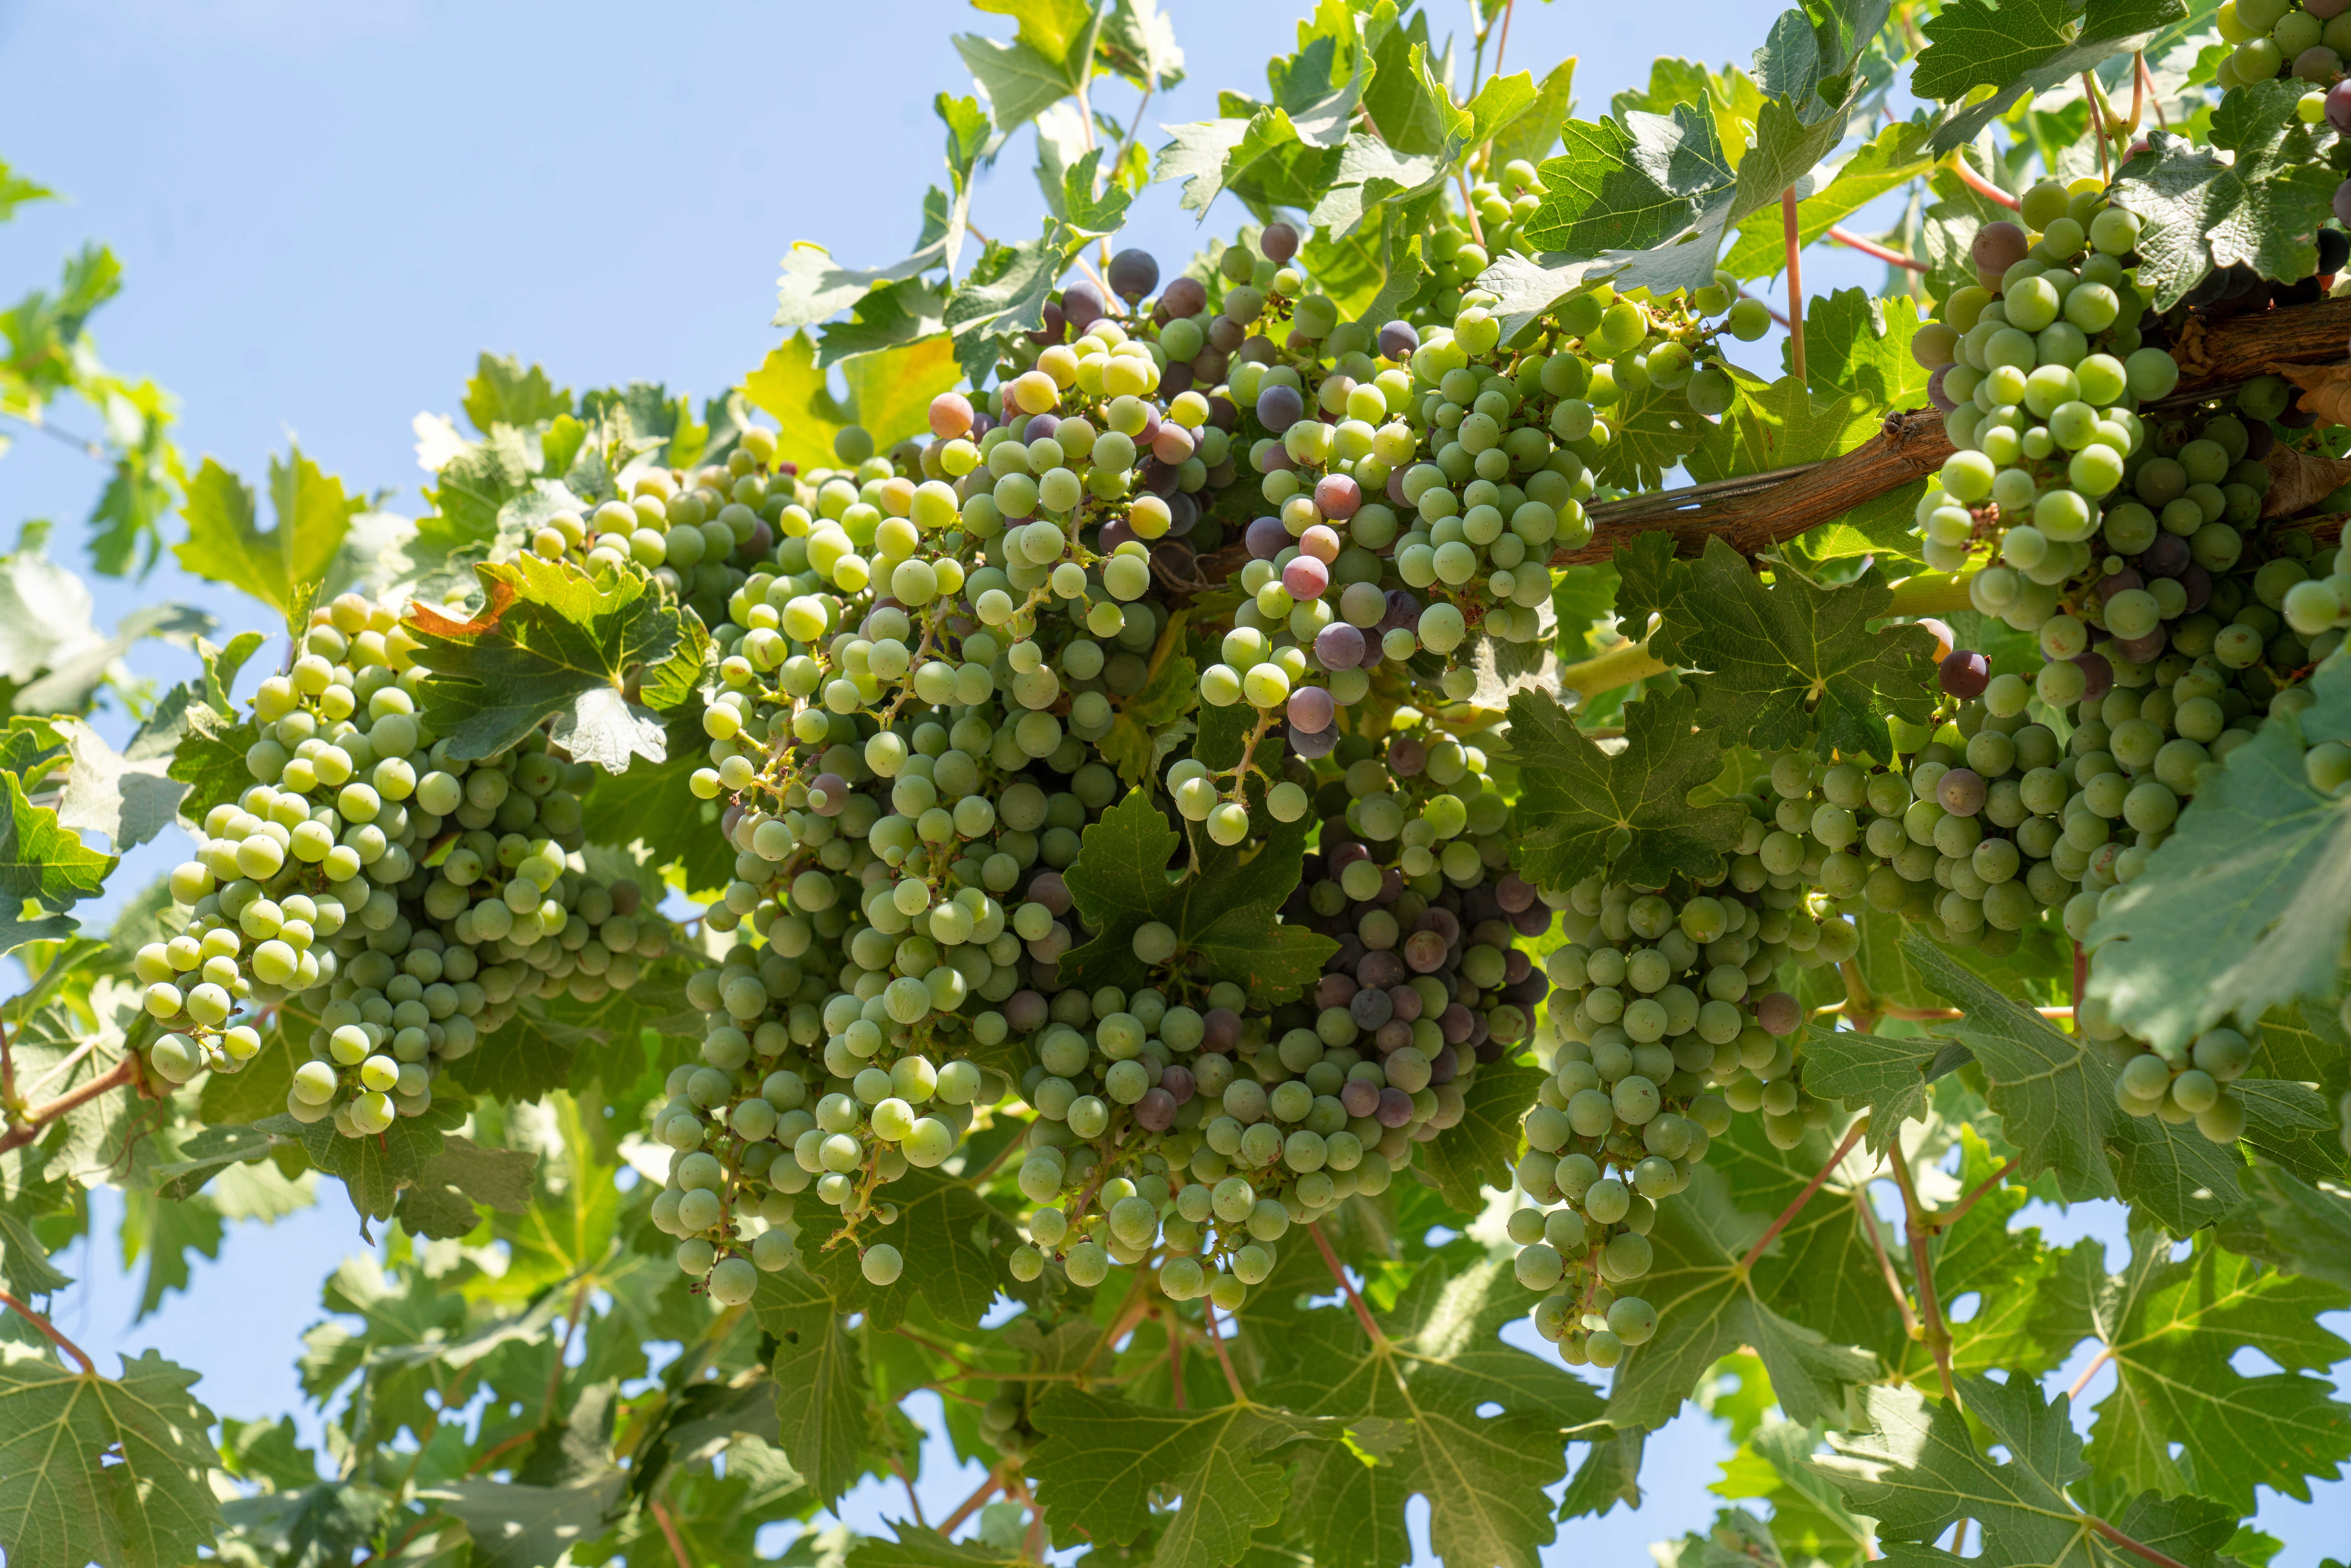 Grape vines elevated two to three feet higher than the traditional wine grape canopy.